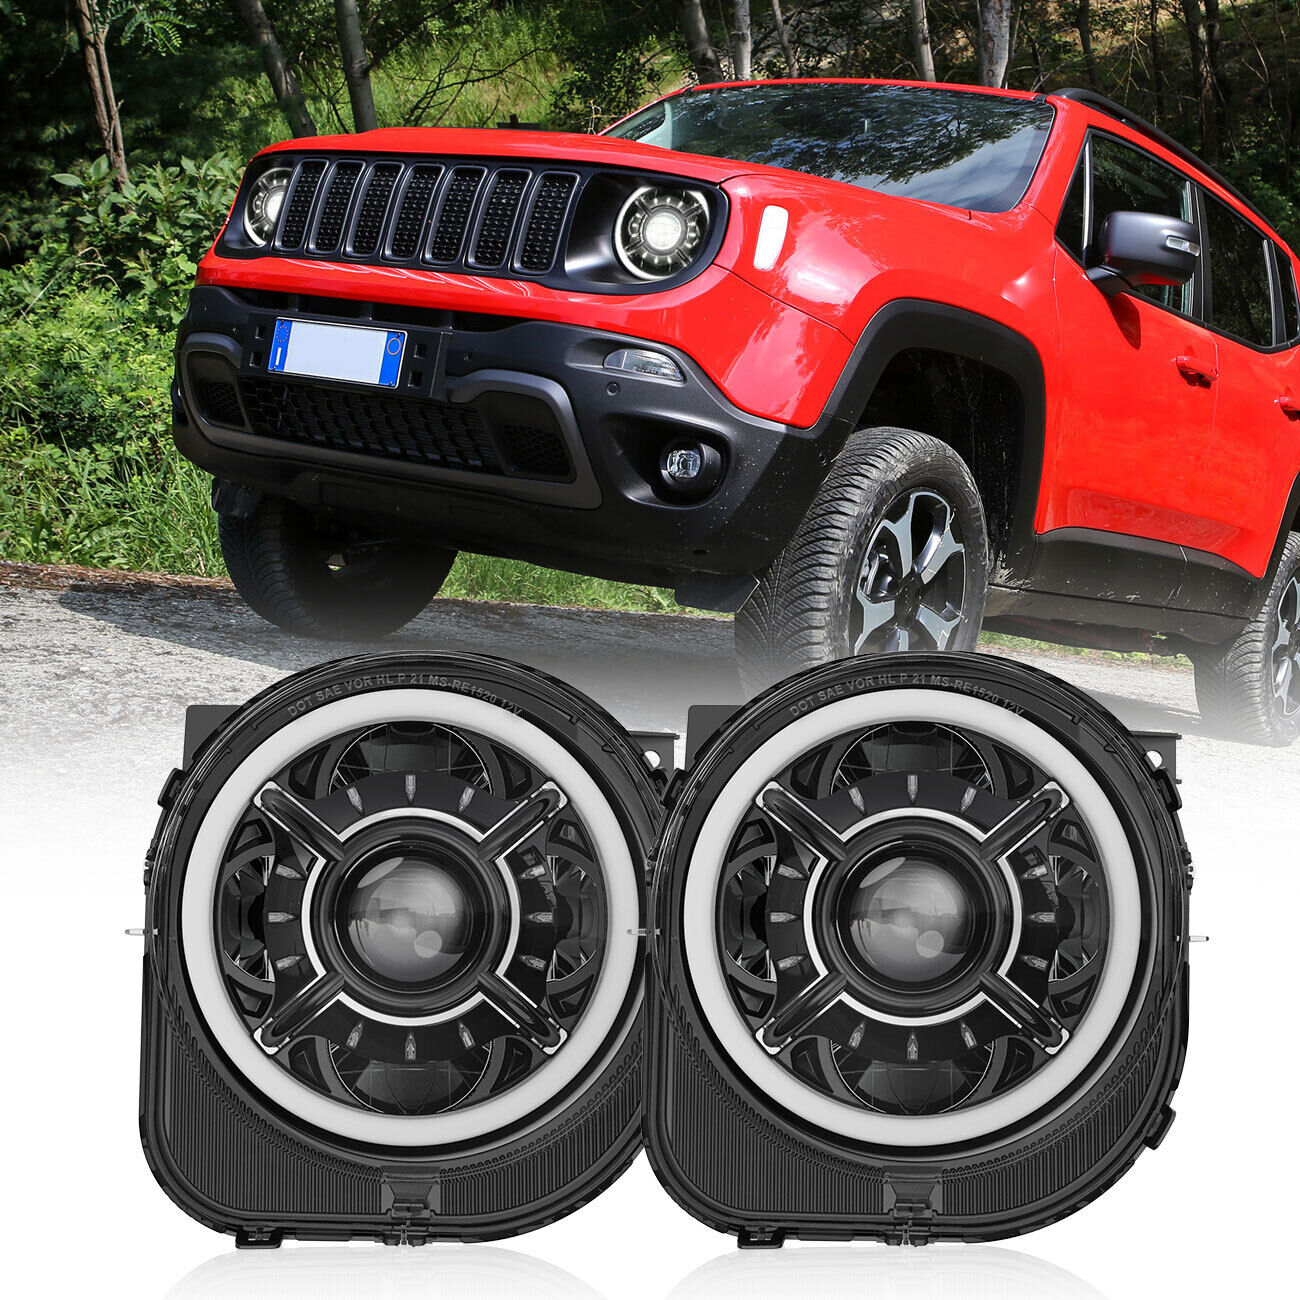 2X 9inch LED Headlights DRL For 2015 2016 2017 2018 2019 2020 2021 Jeep Renegade